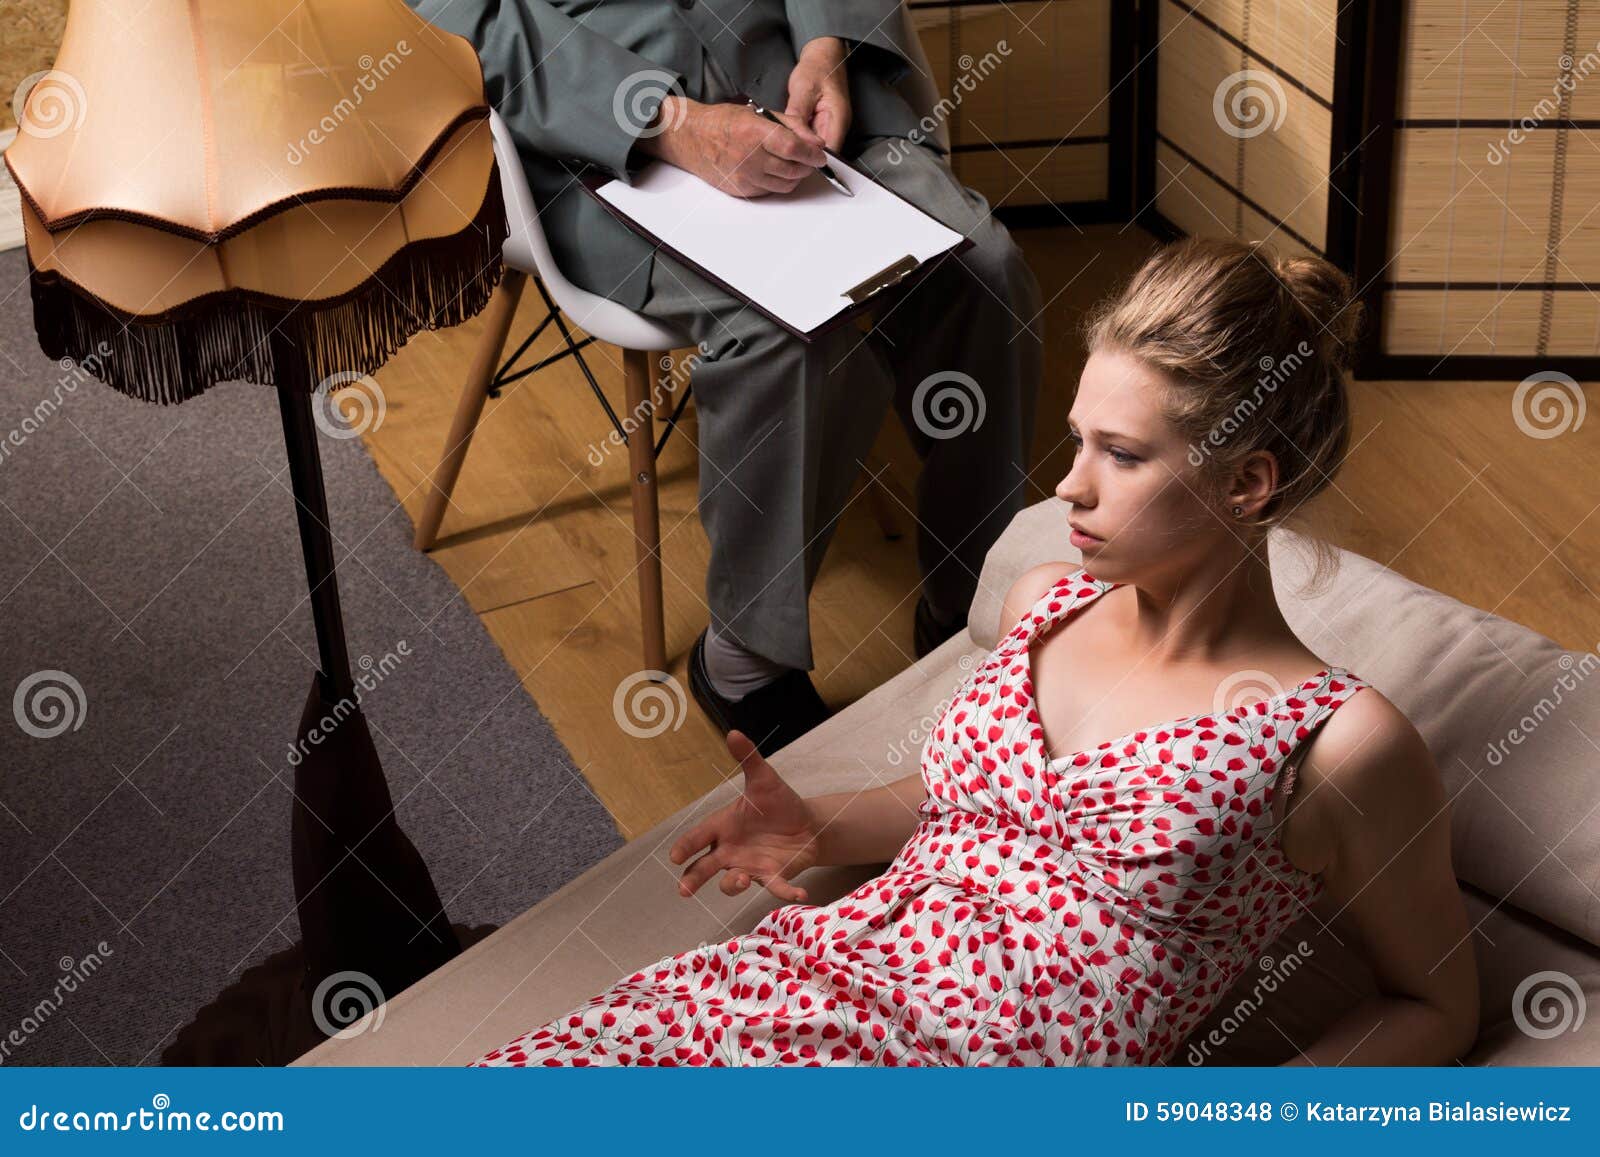 young woman during psychotherapeutic session